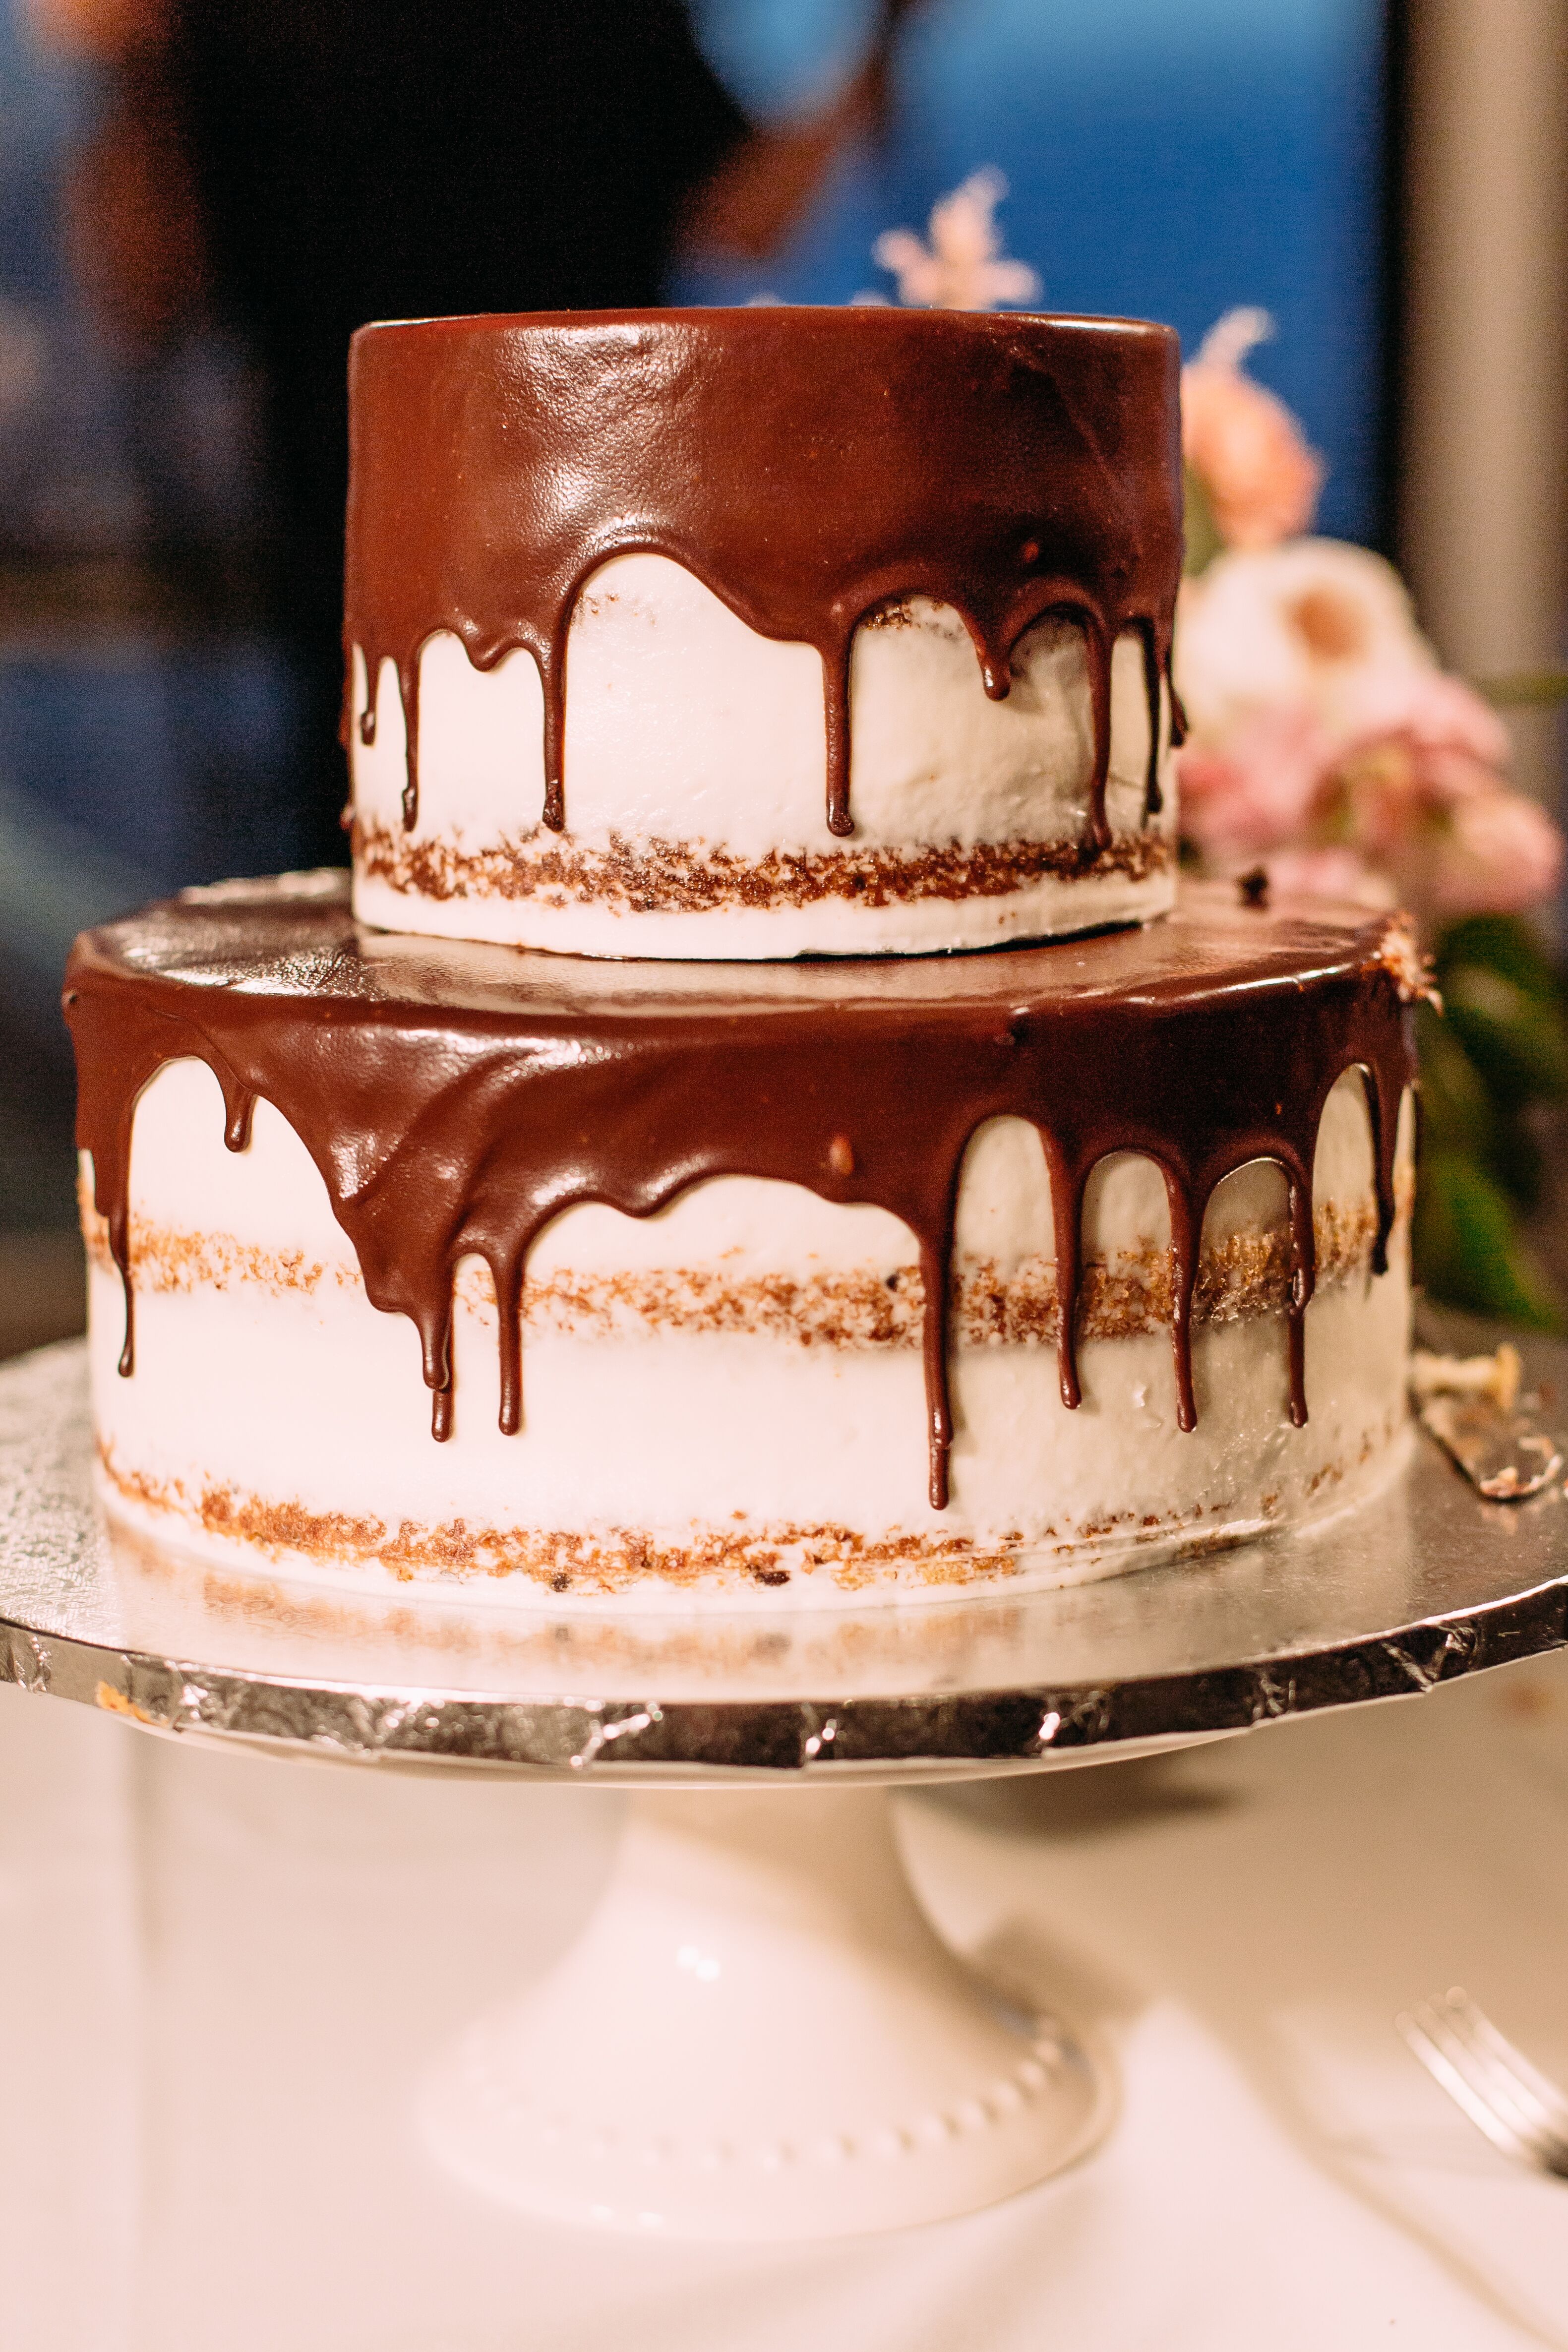 Naked Cake With Chocolate Ganache Drizzle